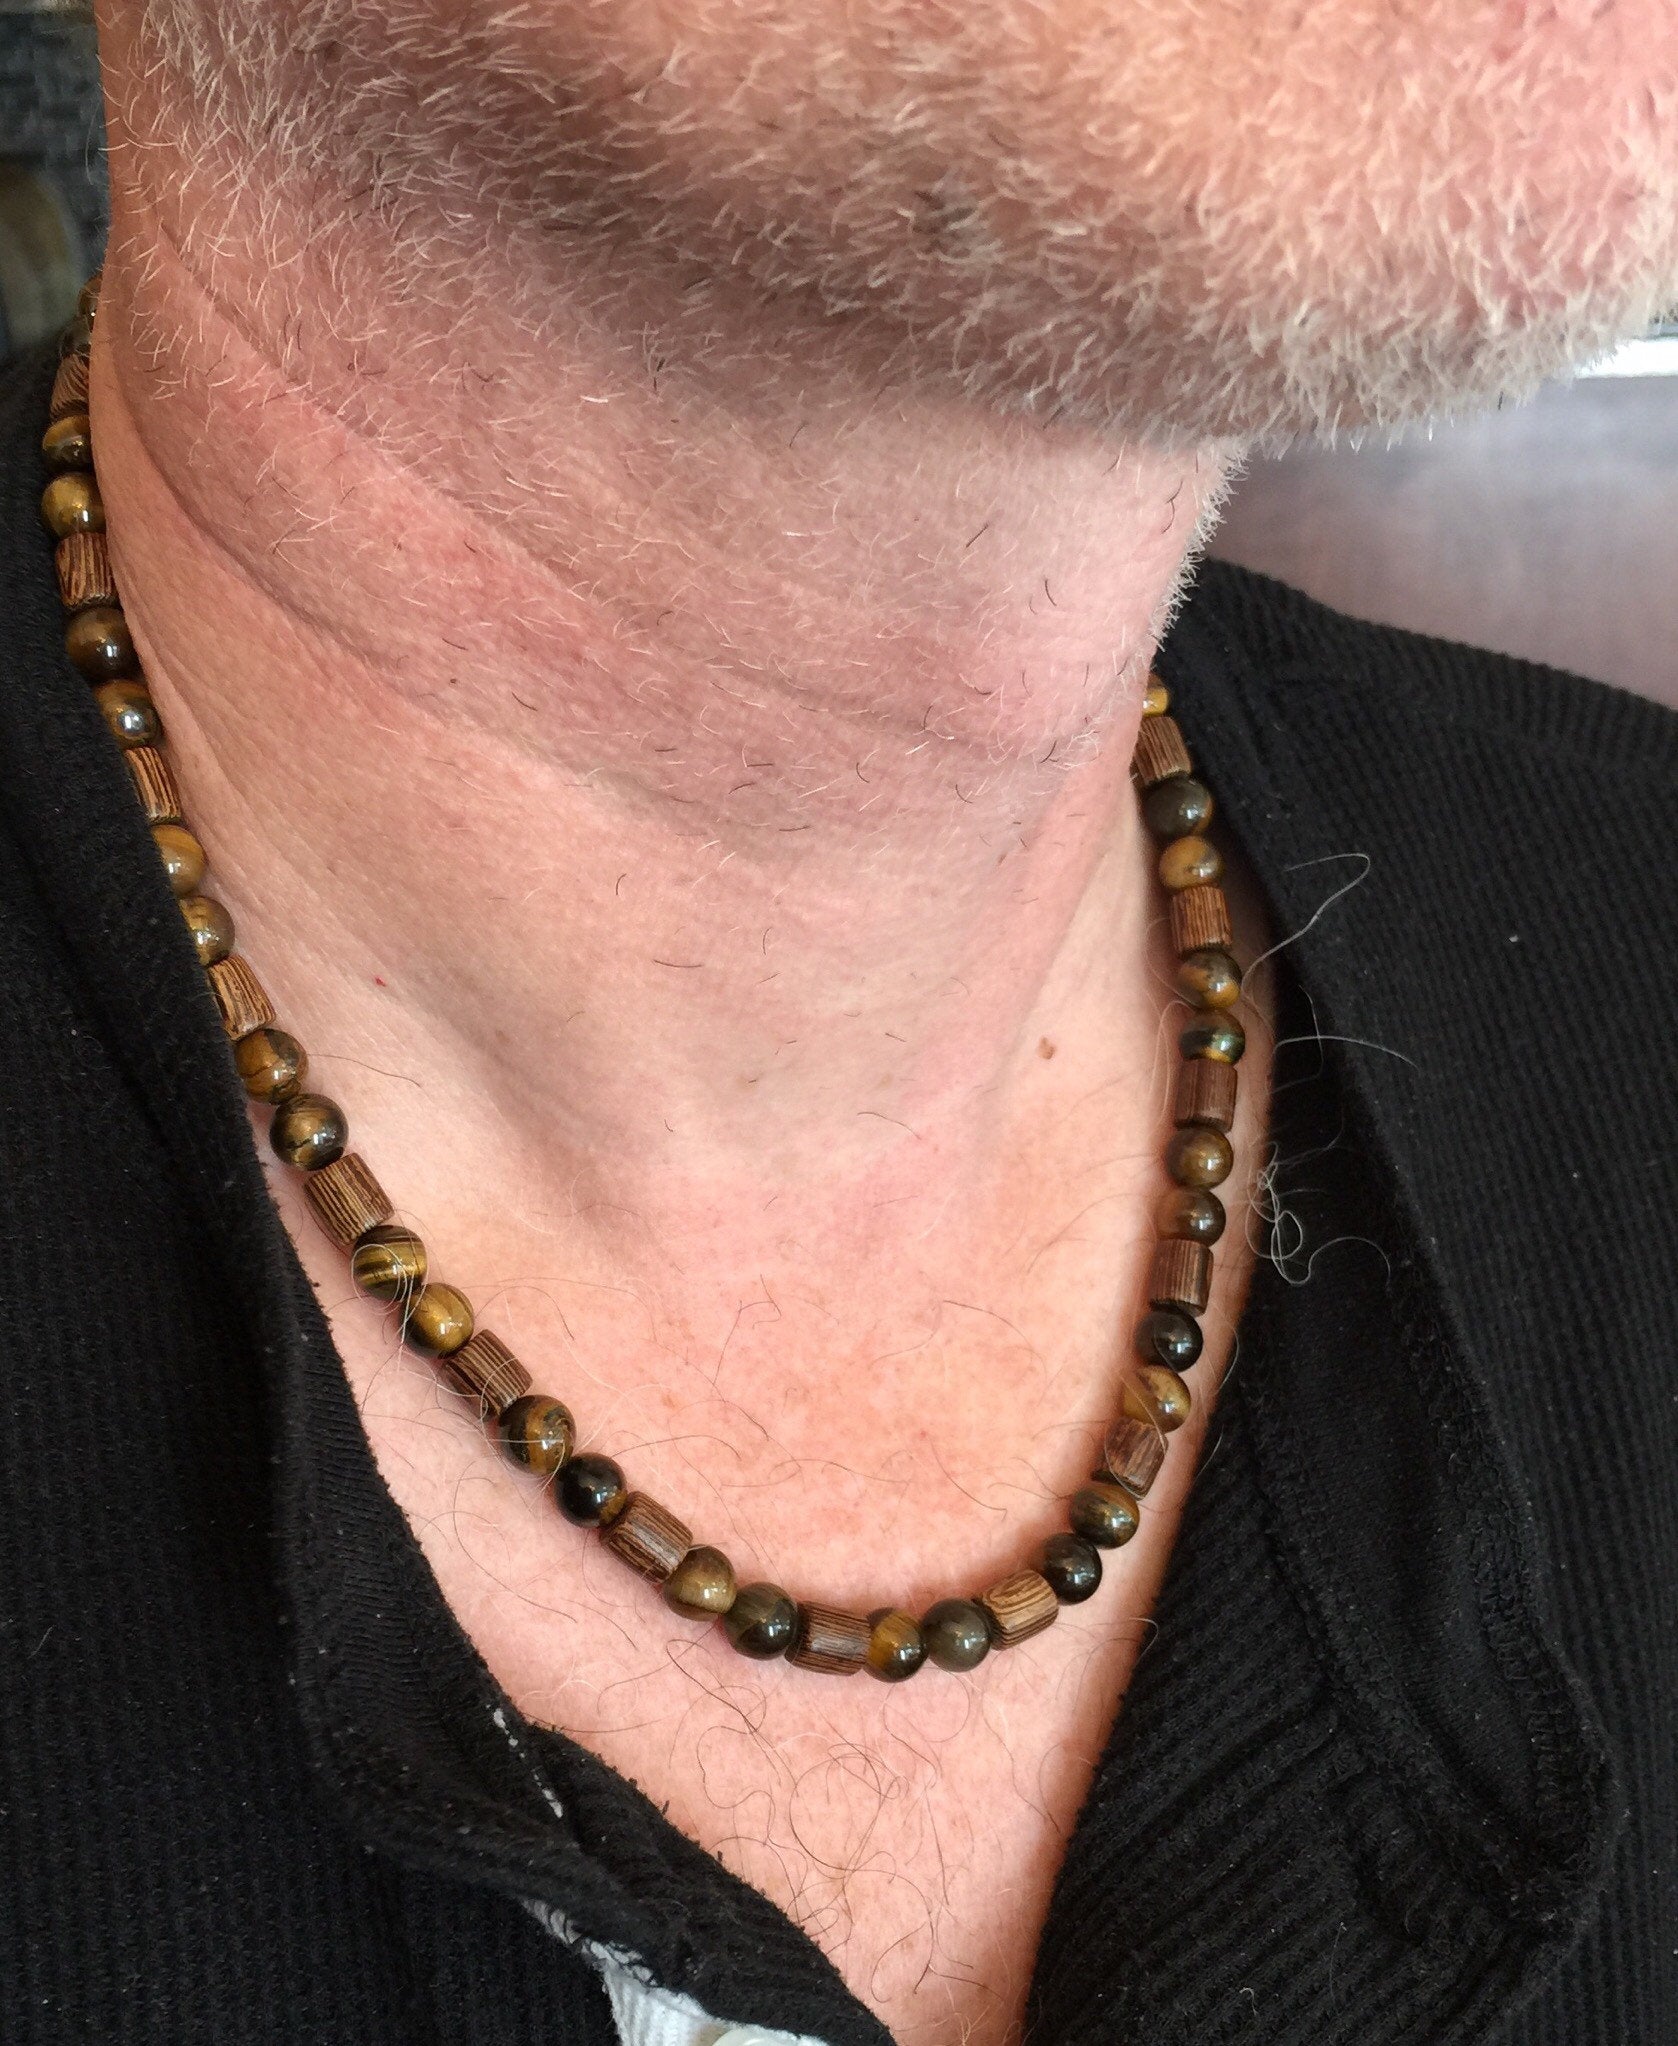 Mask chunky men necklaces / Long beaded necklace for men - Inspire Uplift